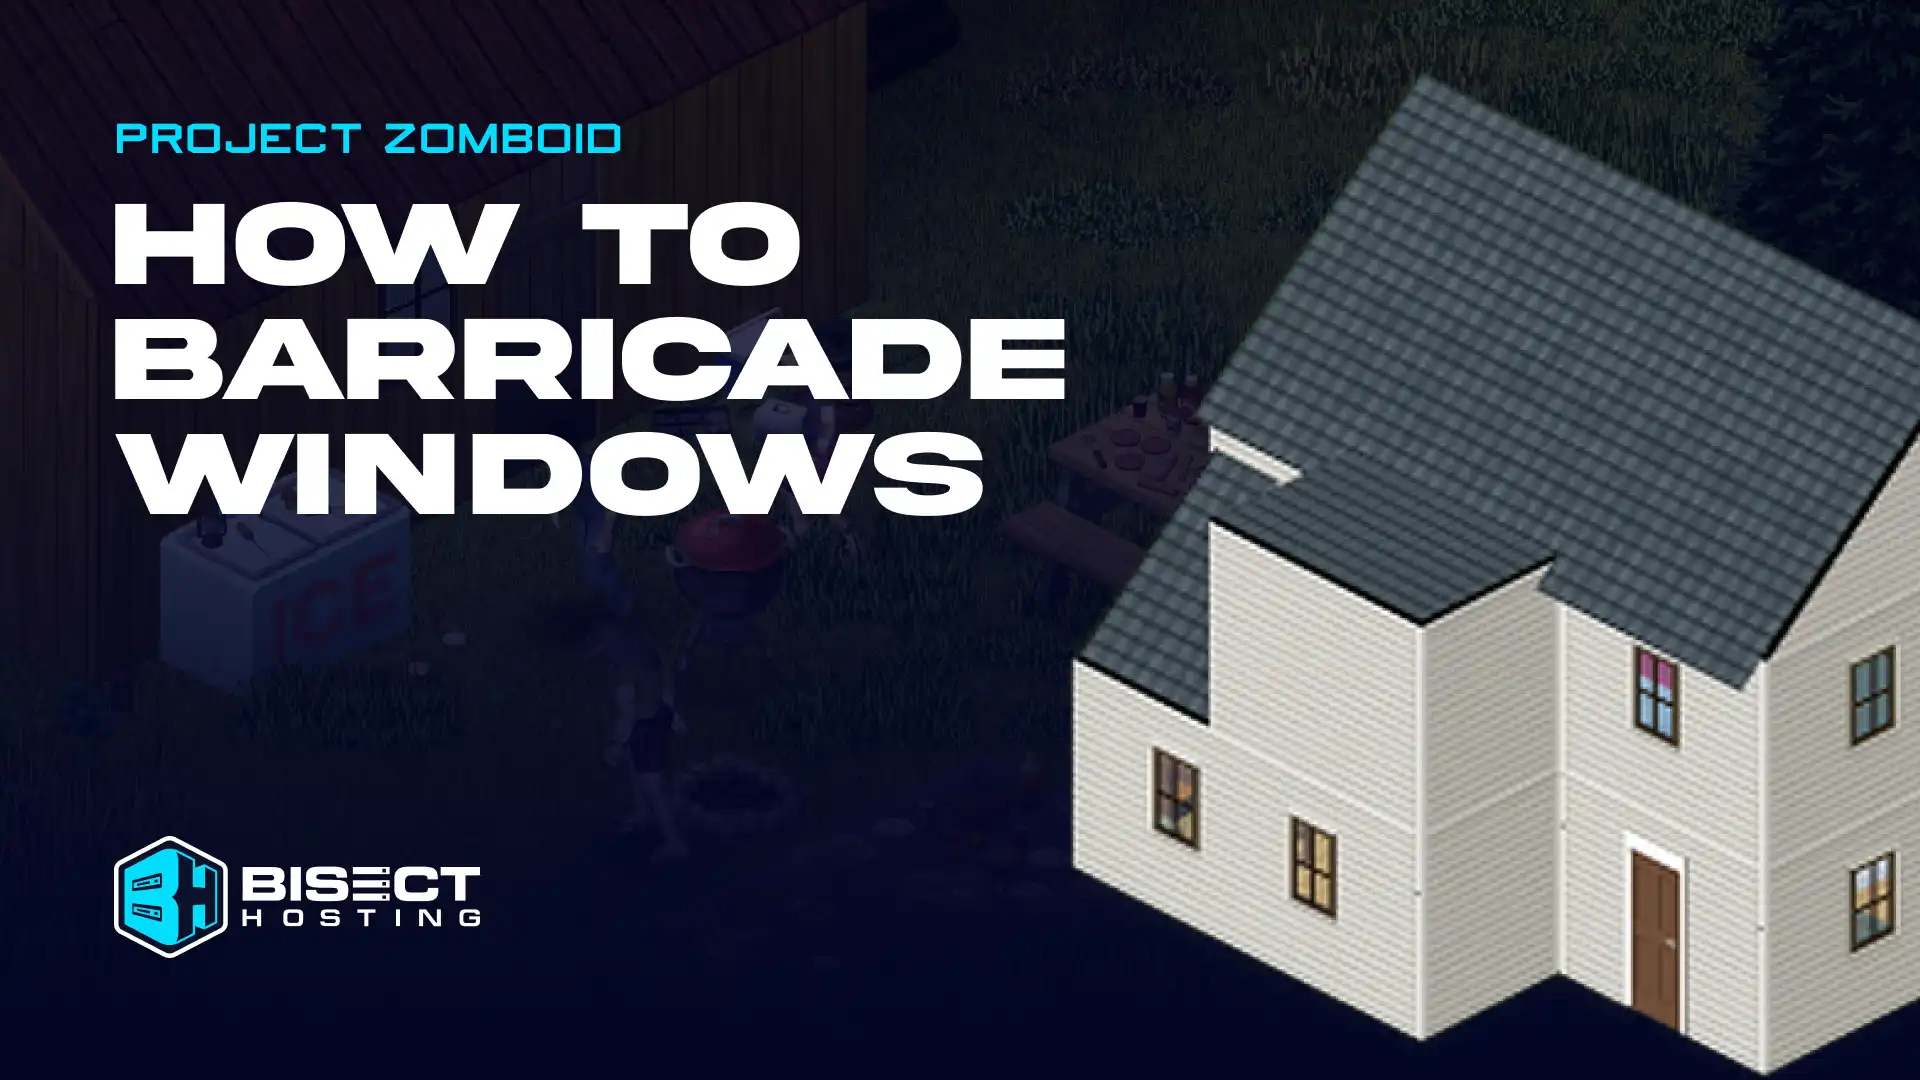 How to Barricade Windows in Project Zomboid